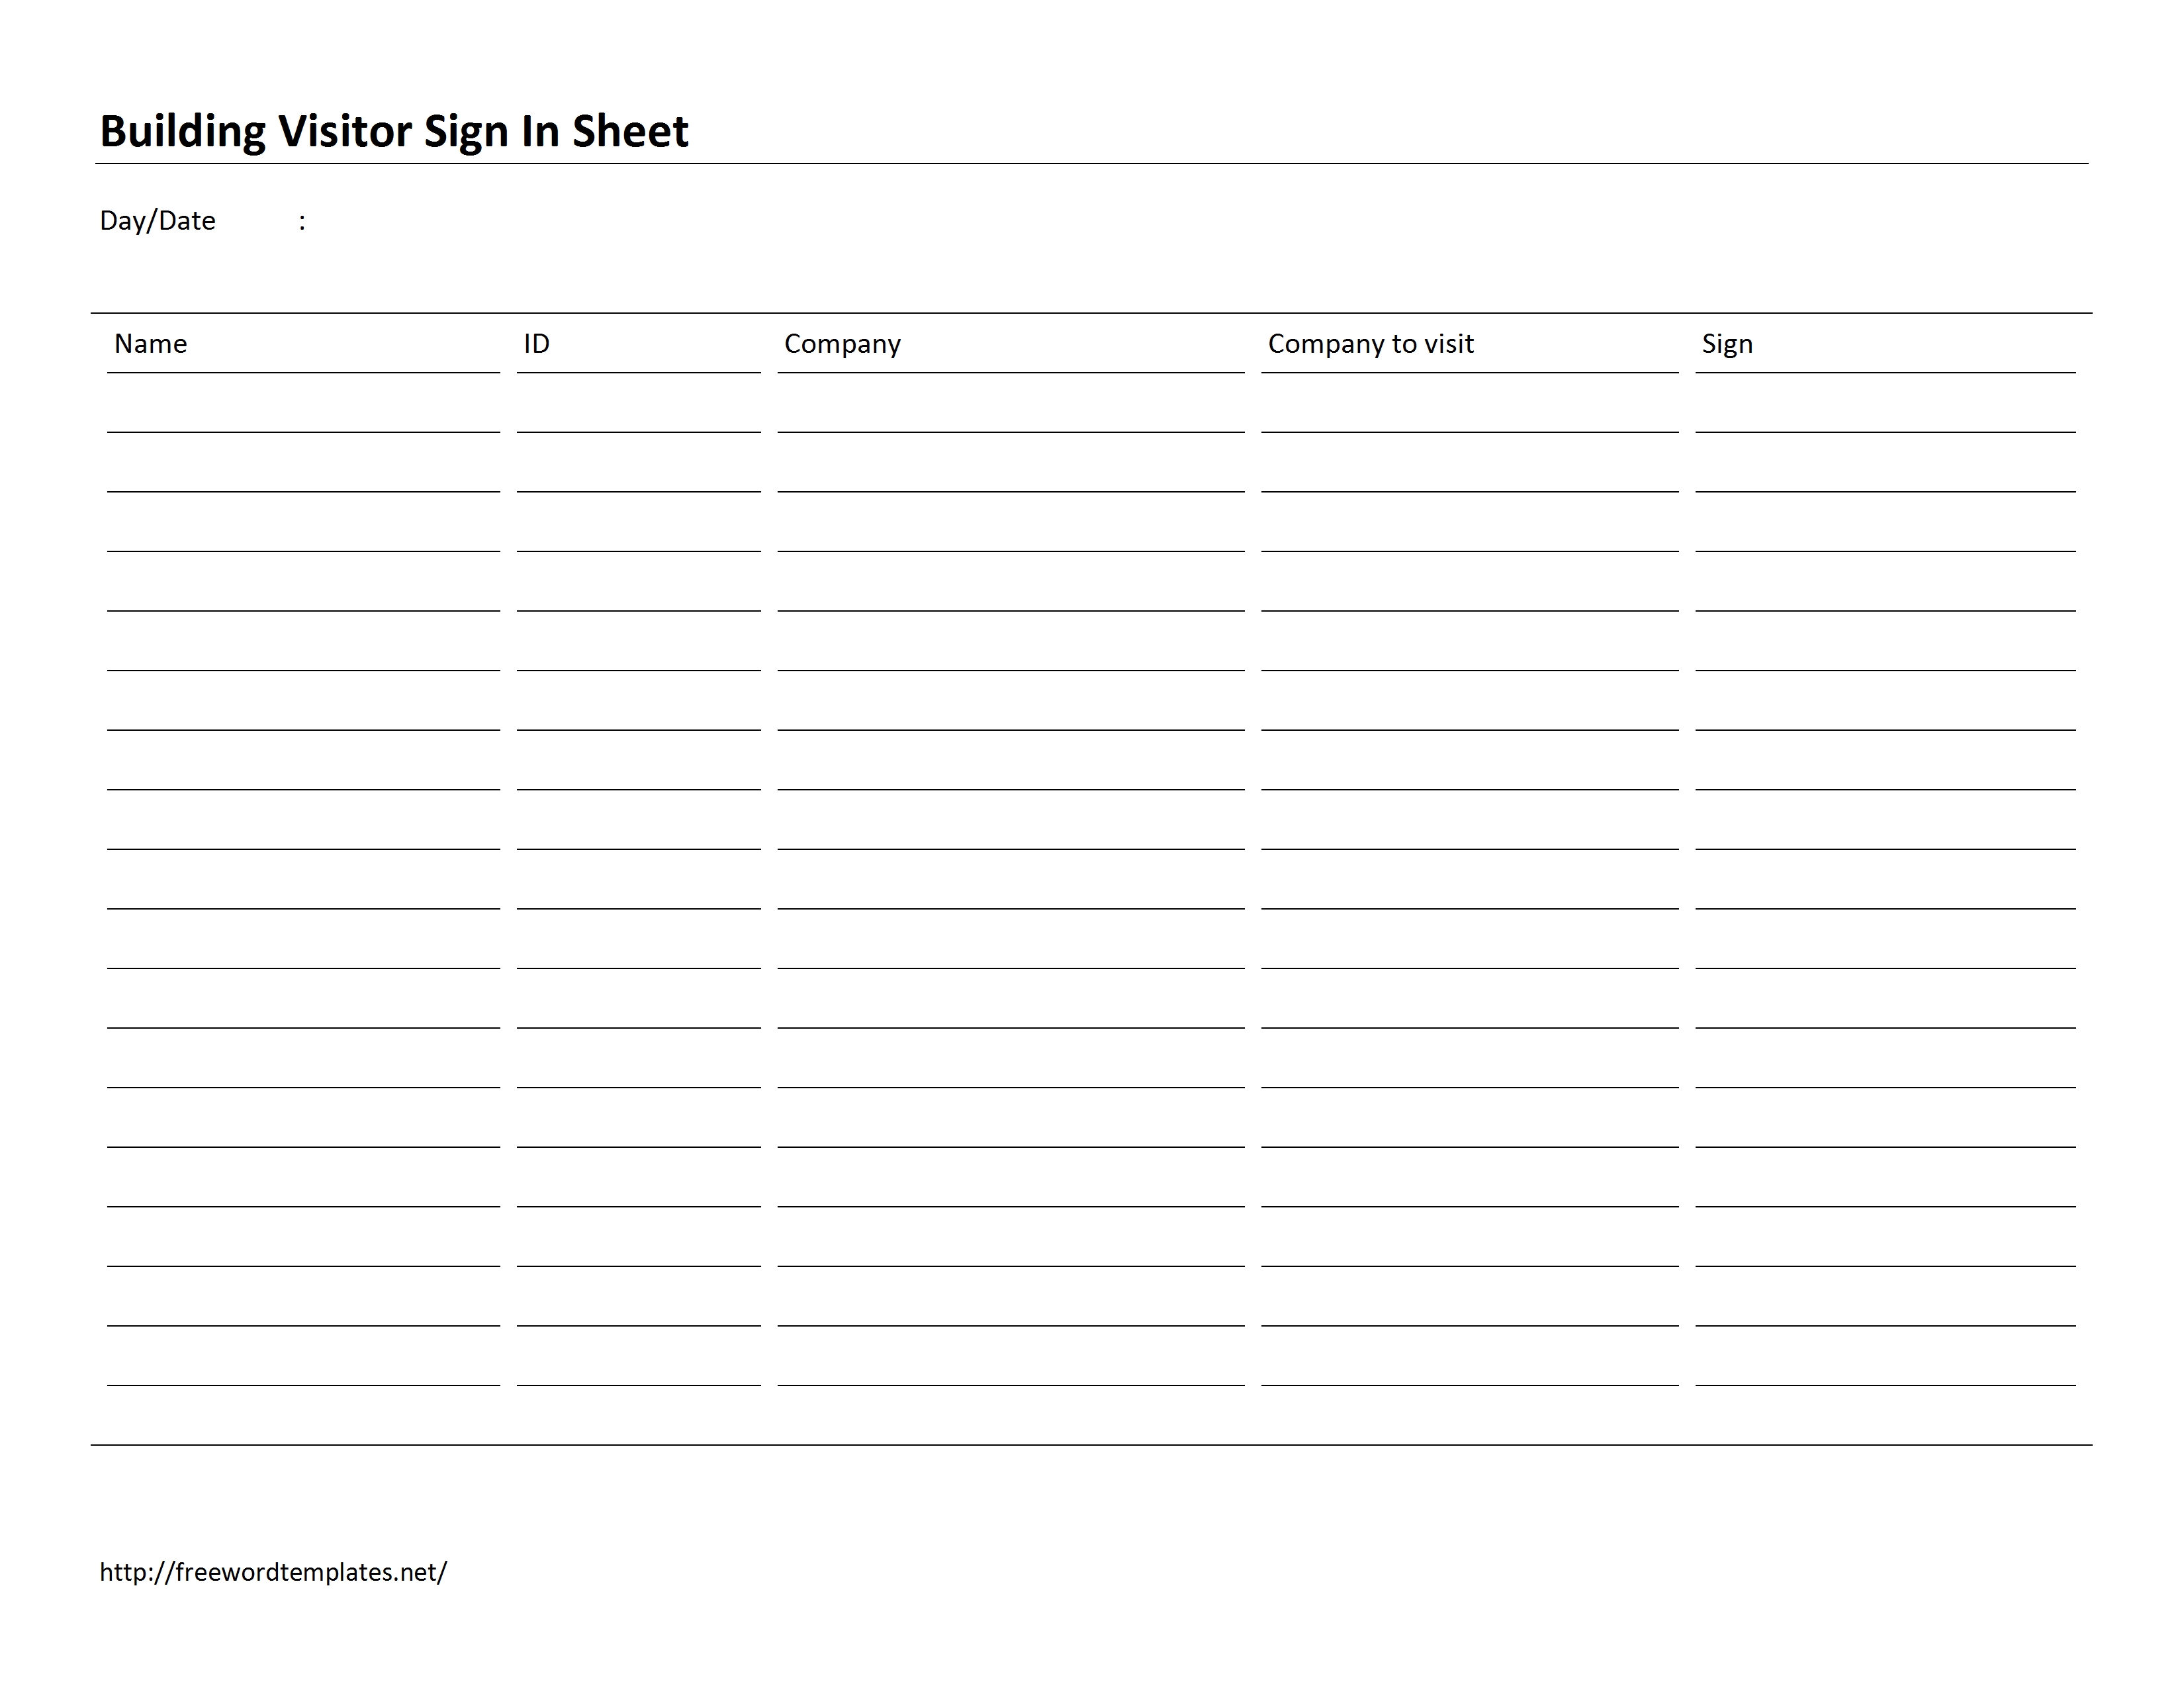 Building Visitor Sign In Sheet Template for MS Word